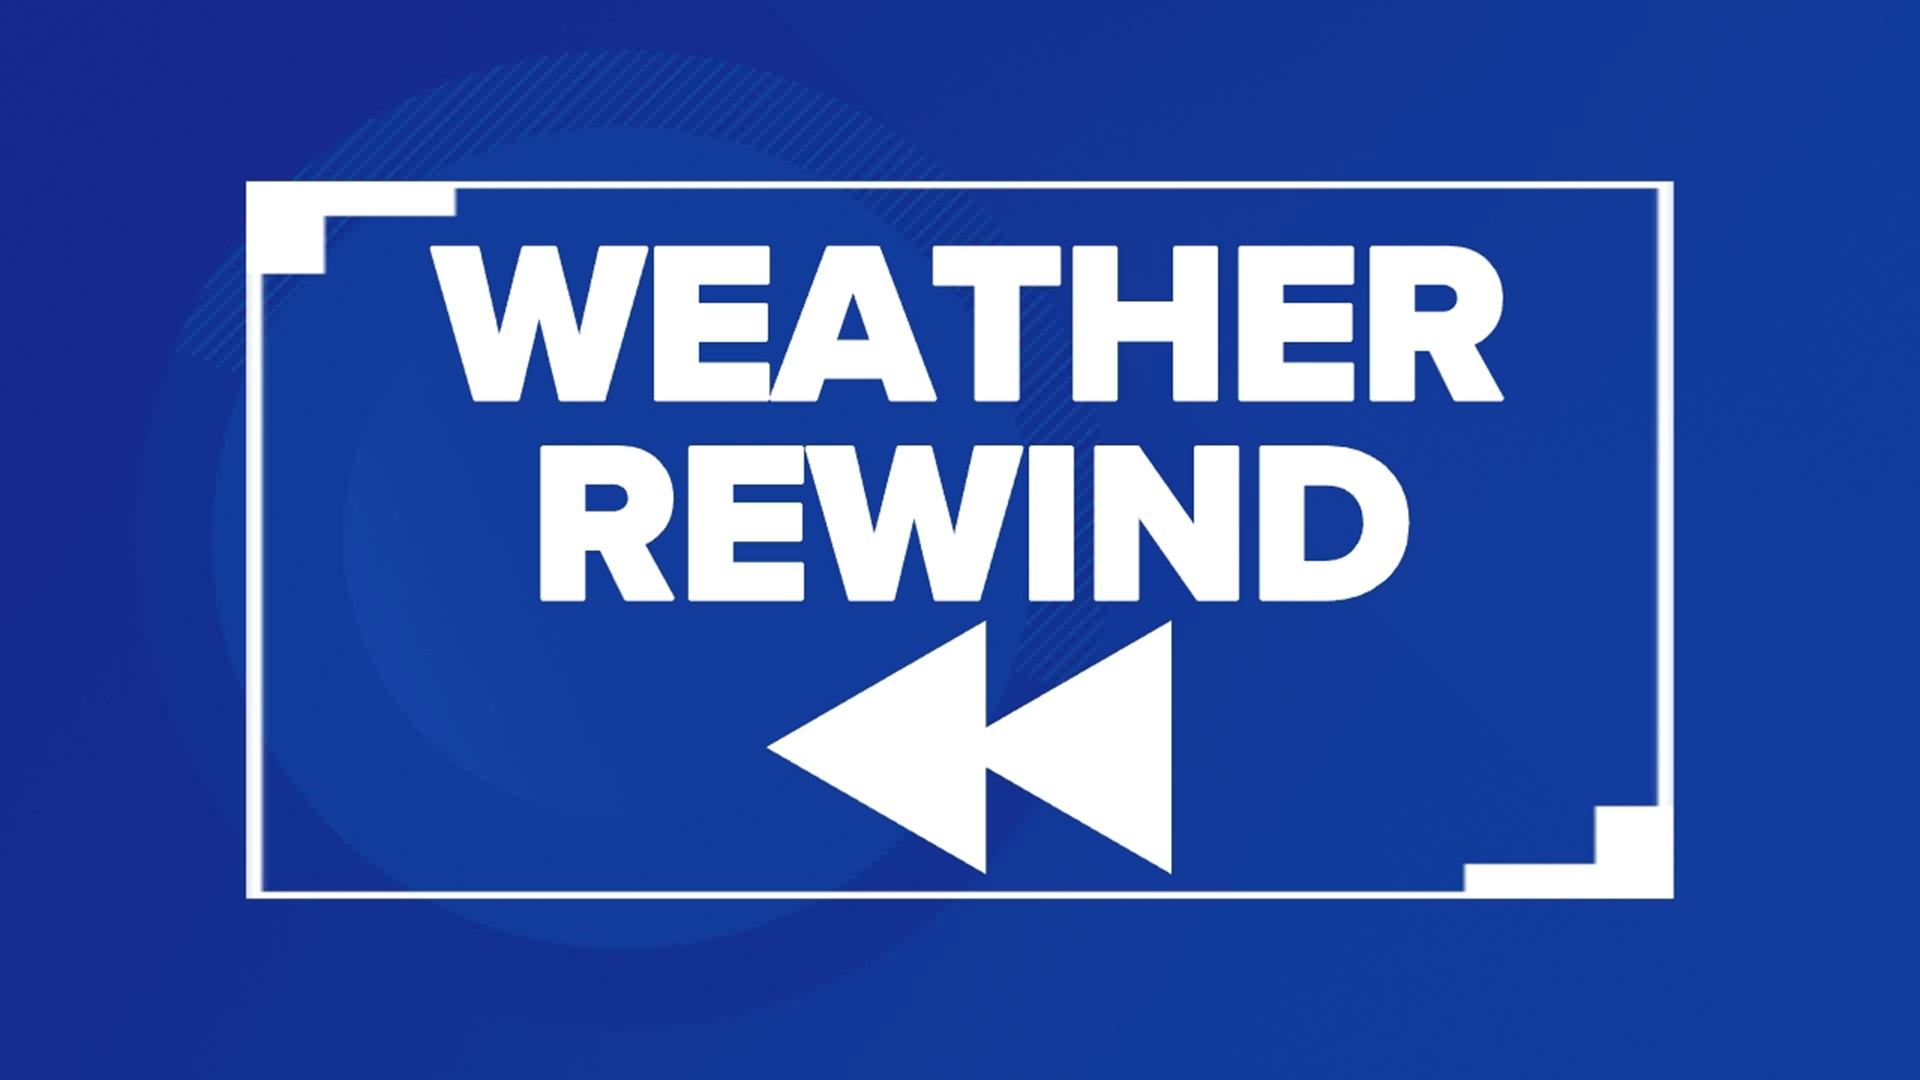 In this week's Weather Rewind, we look back at the first snow for many folks in Central Pa. November snow isn't unusual, but the timing was a little early for some!